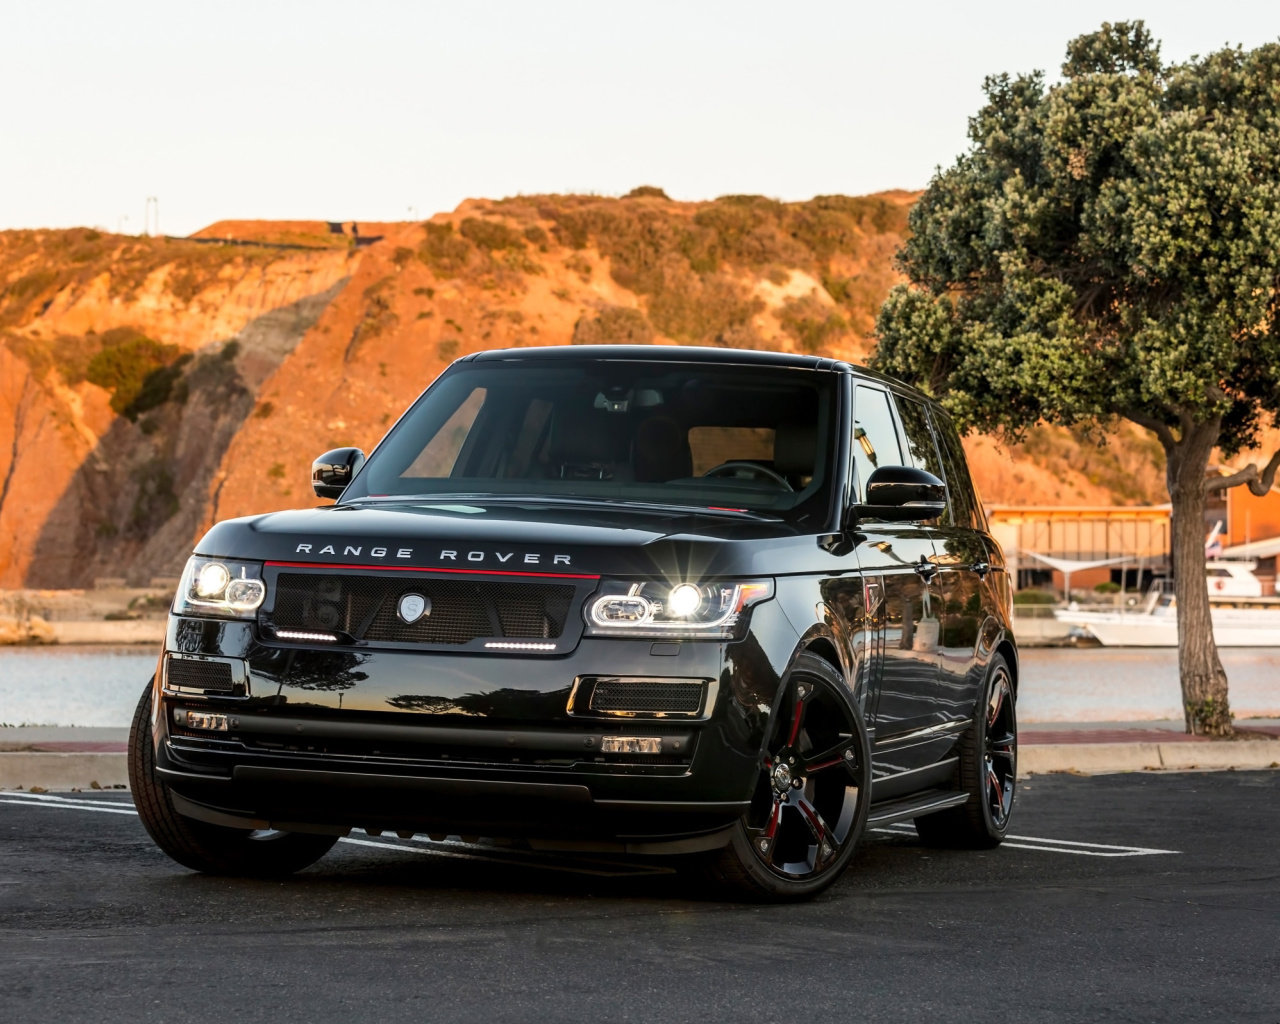 Range Rover STRUT with Grille Package wallpaper 1280x1024